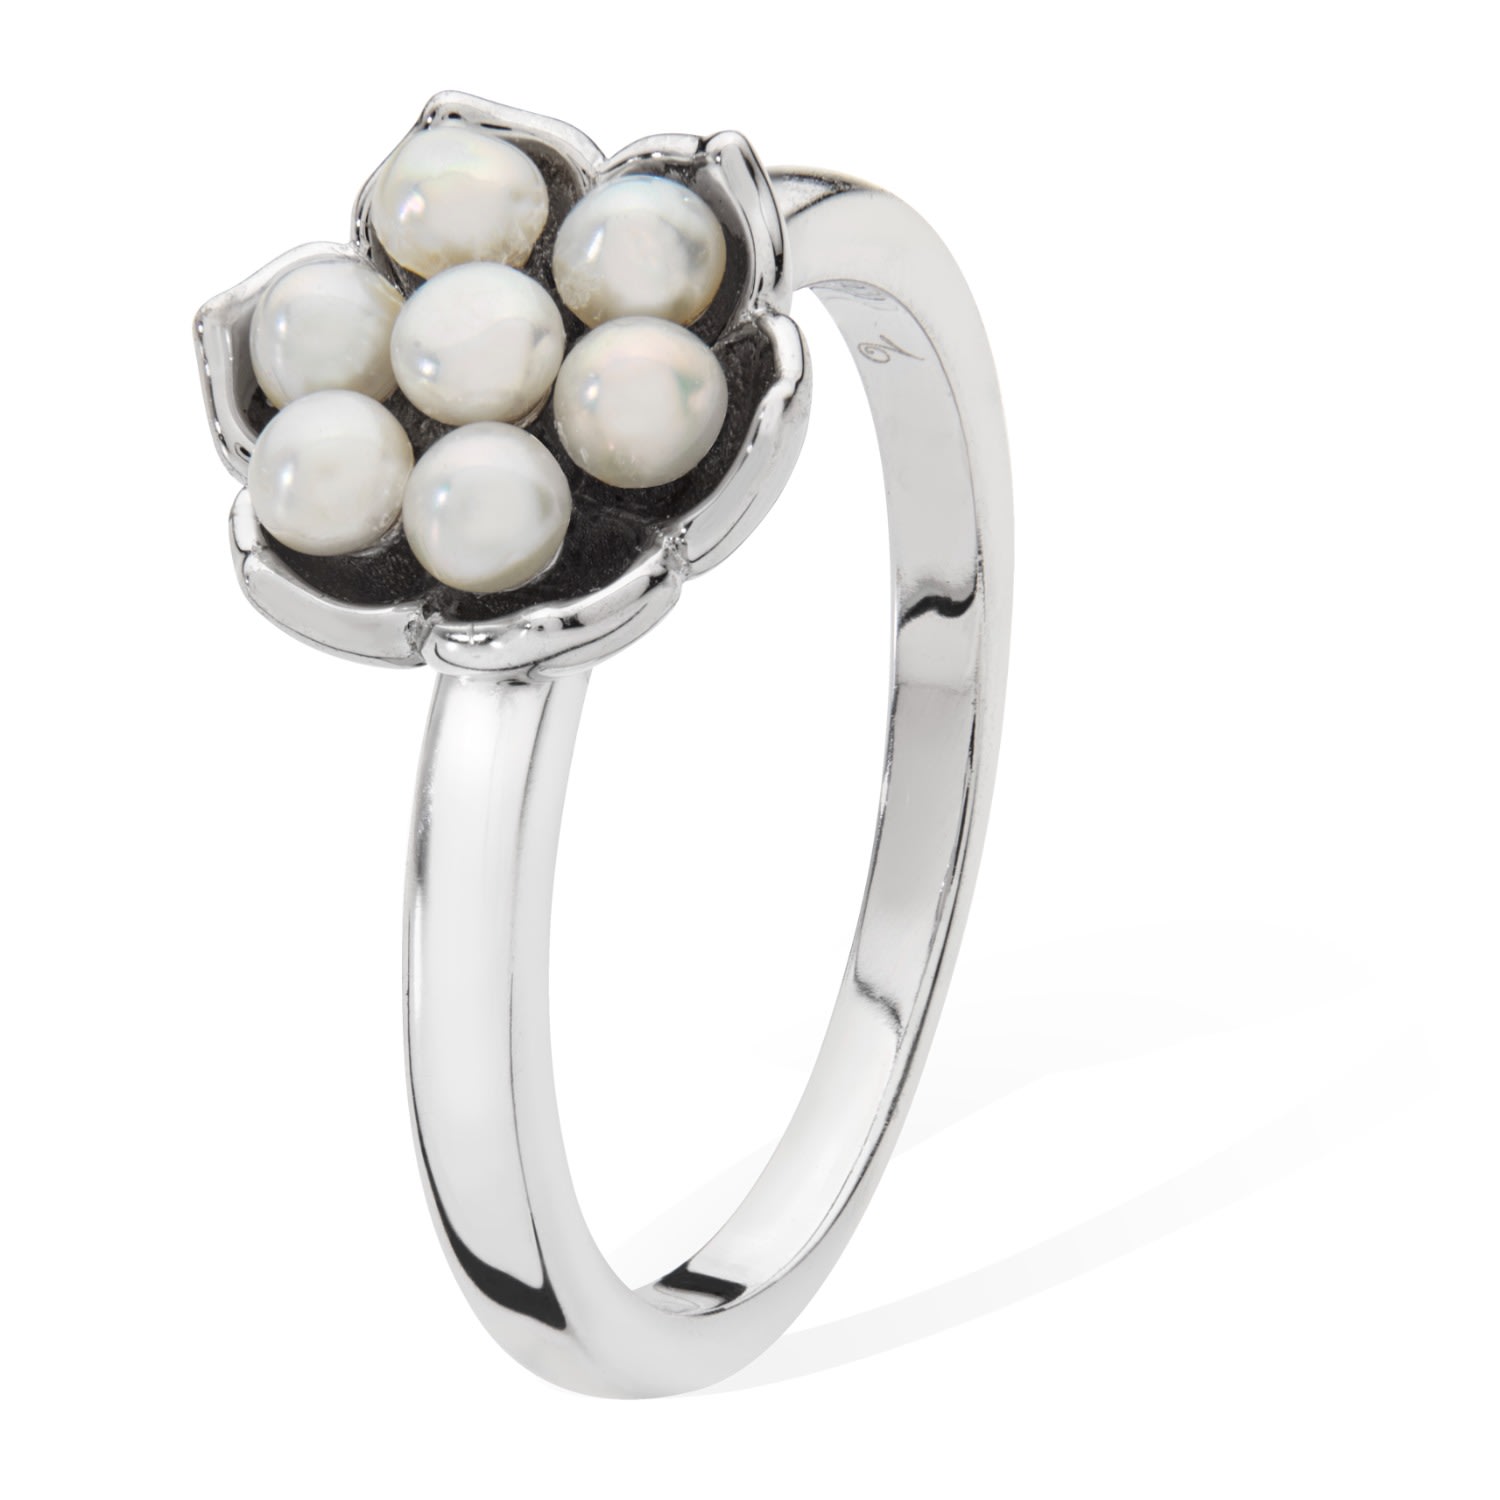 Lucy Quartermaine Women's Silver Royal Pearl Flower Ring In Metallic